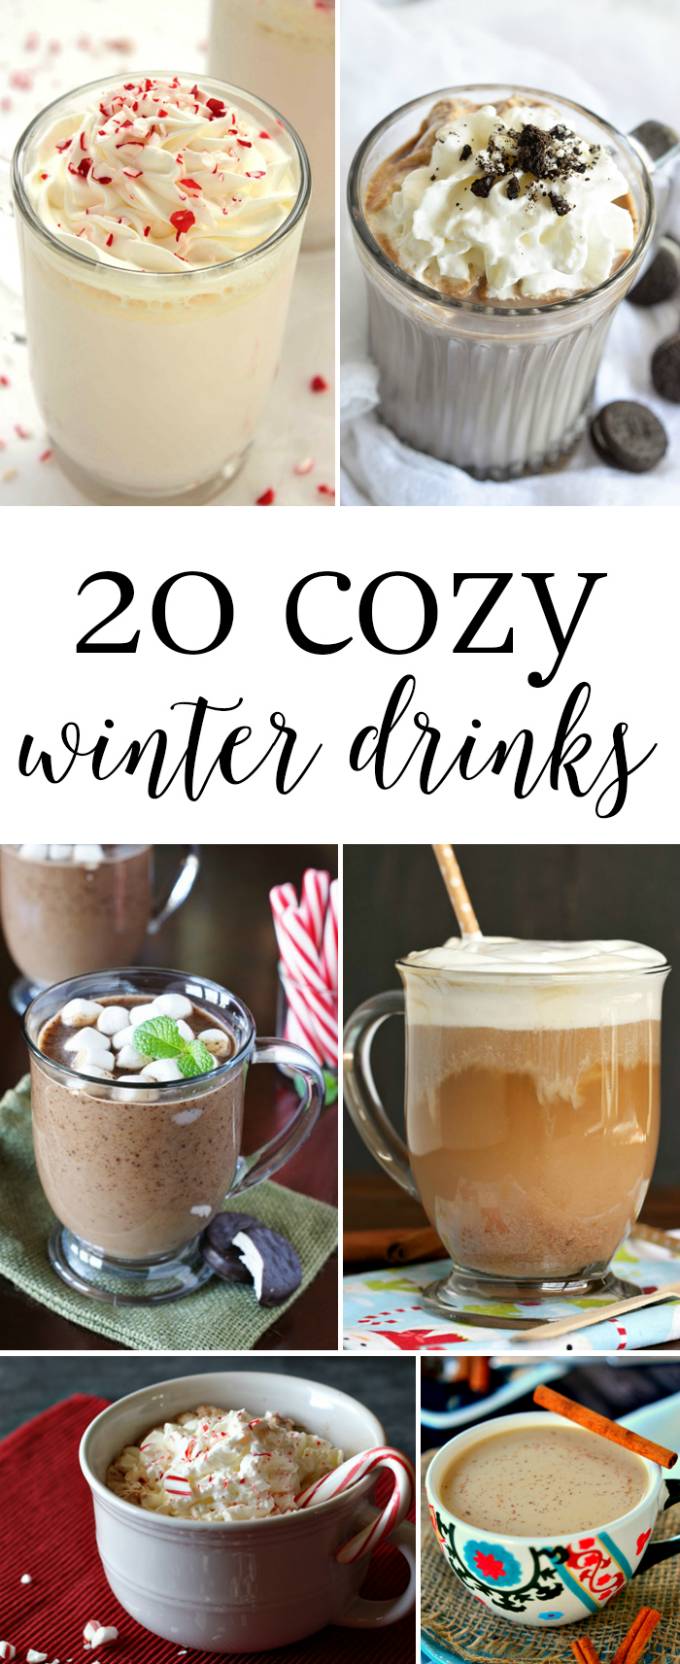 20 Cozy Winter Drinks-A fun list of 20 cozy winter drinks, so you never run out of delicious options during the cold winter season.